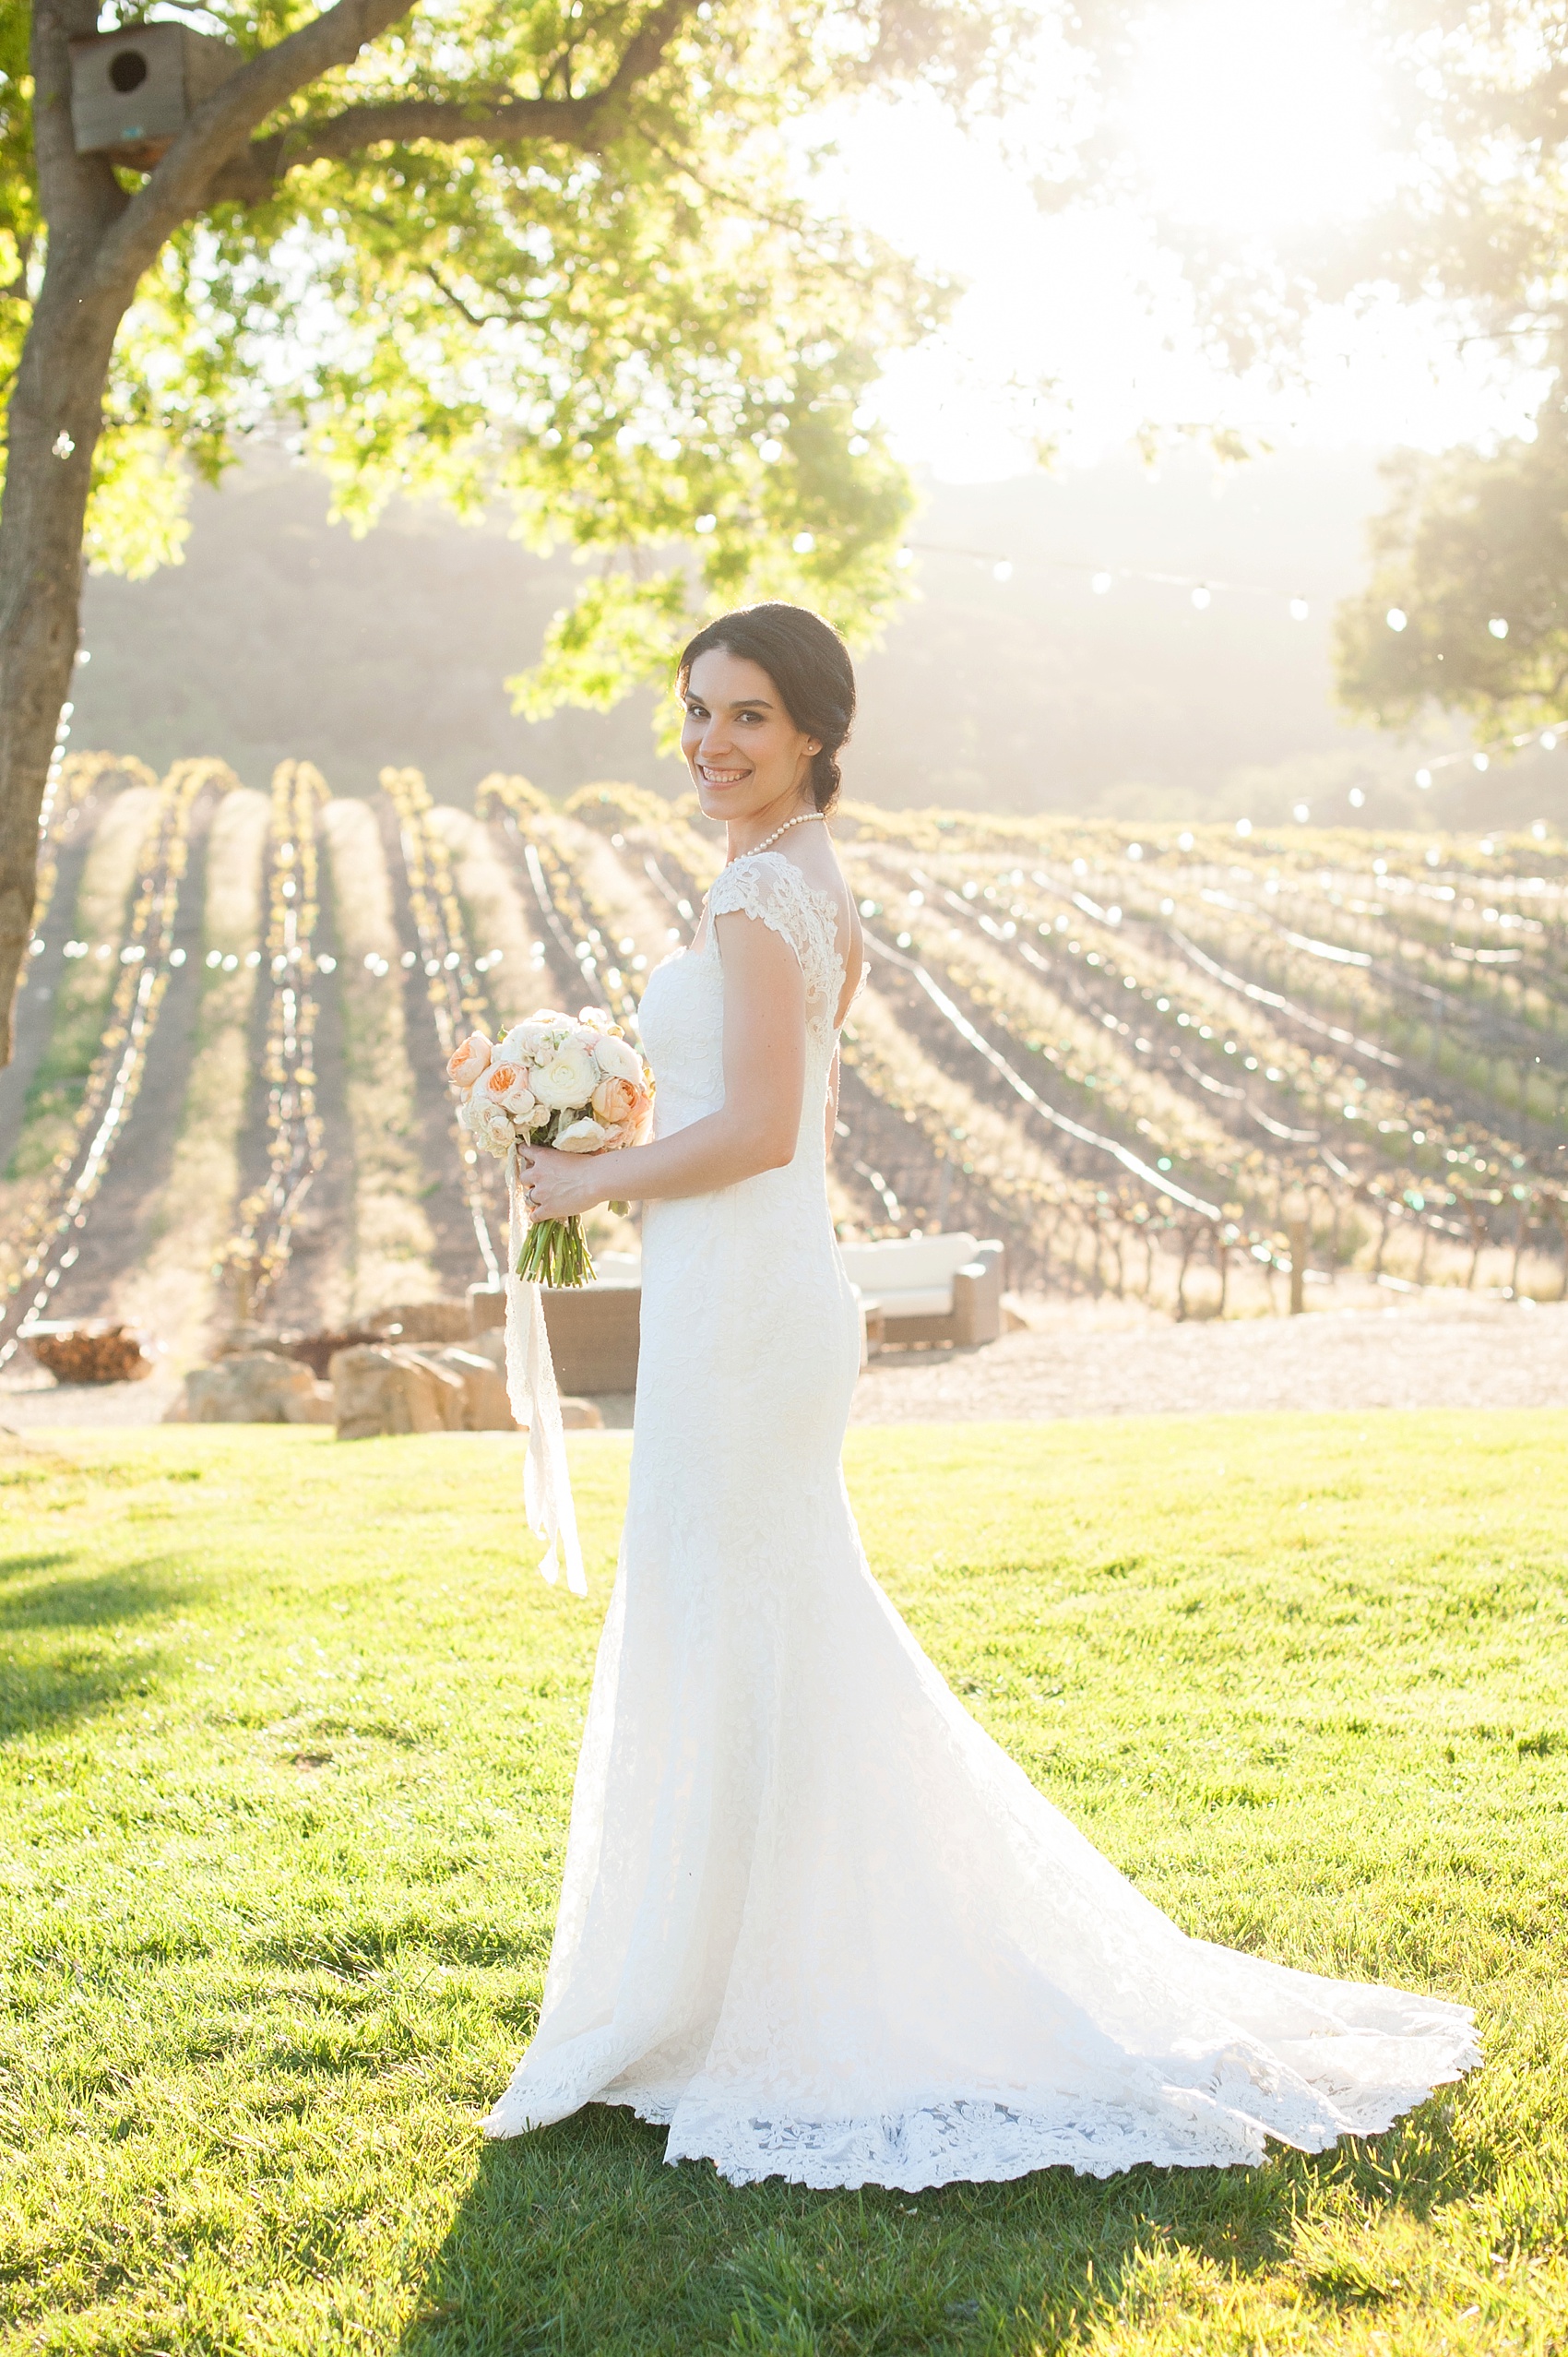 Spring vineyard elopement with Mikkel Paige, destination wedding photographer. Held at HammerSky Vineyard, south of San Francisco. The bride in a Ramona Keveza Legends gown.